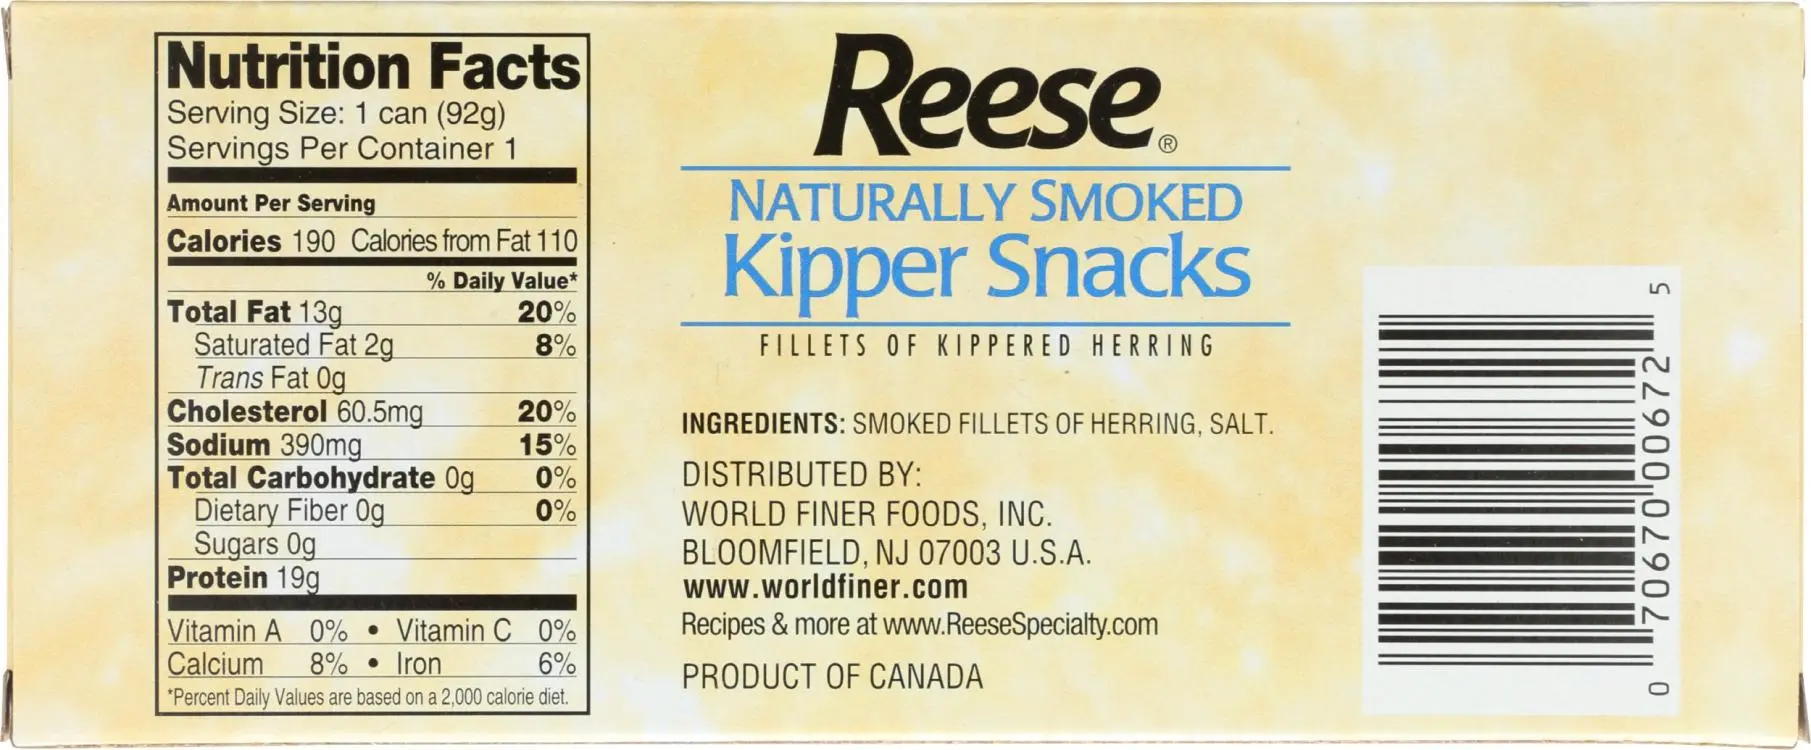 calories in a smoked kipper - How many calories are in 100g of smoked herring